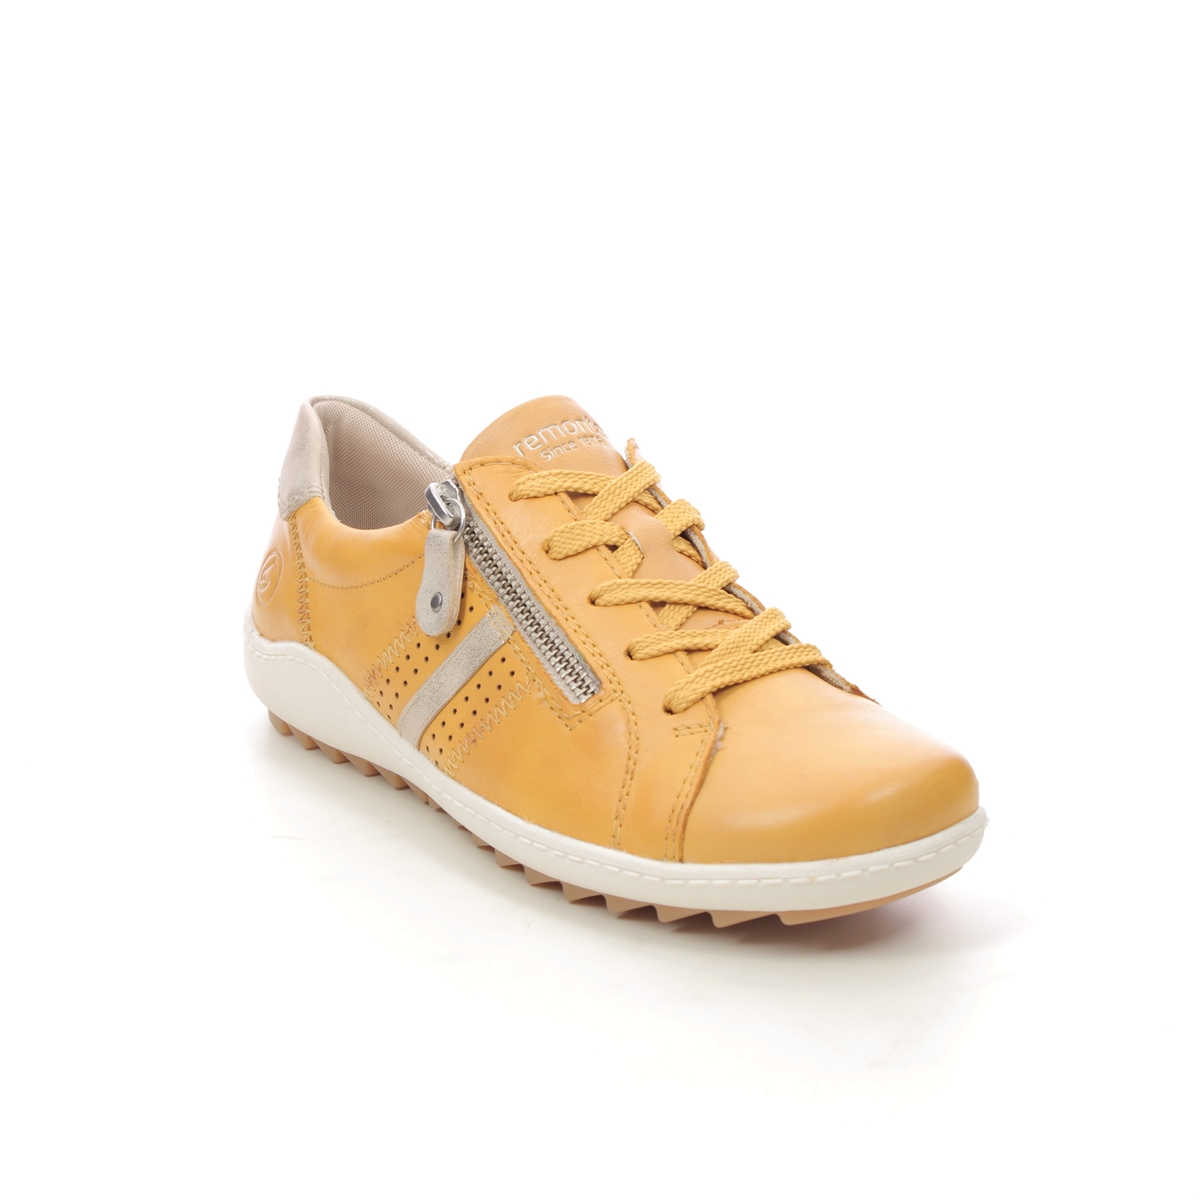 Remonte Zigzip 1 Yellow Womens Lacing Shoes R1432-68 In Size 39 In Plain Yellow